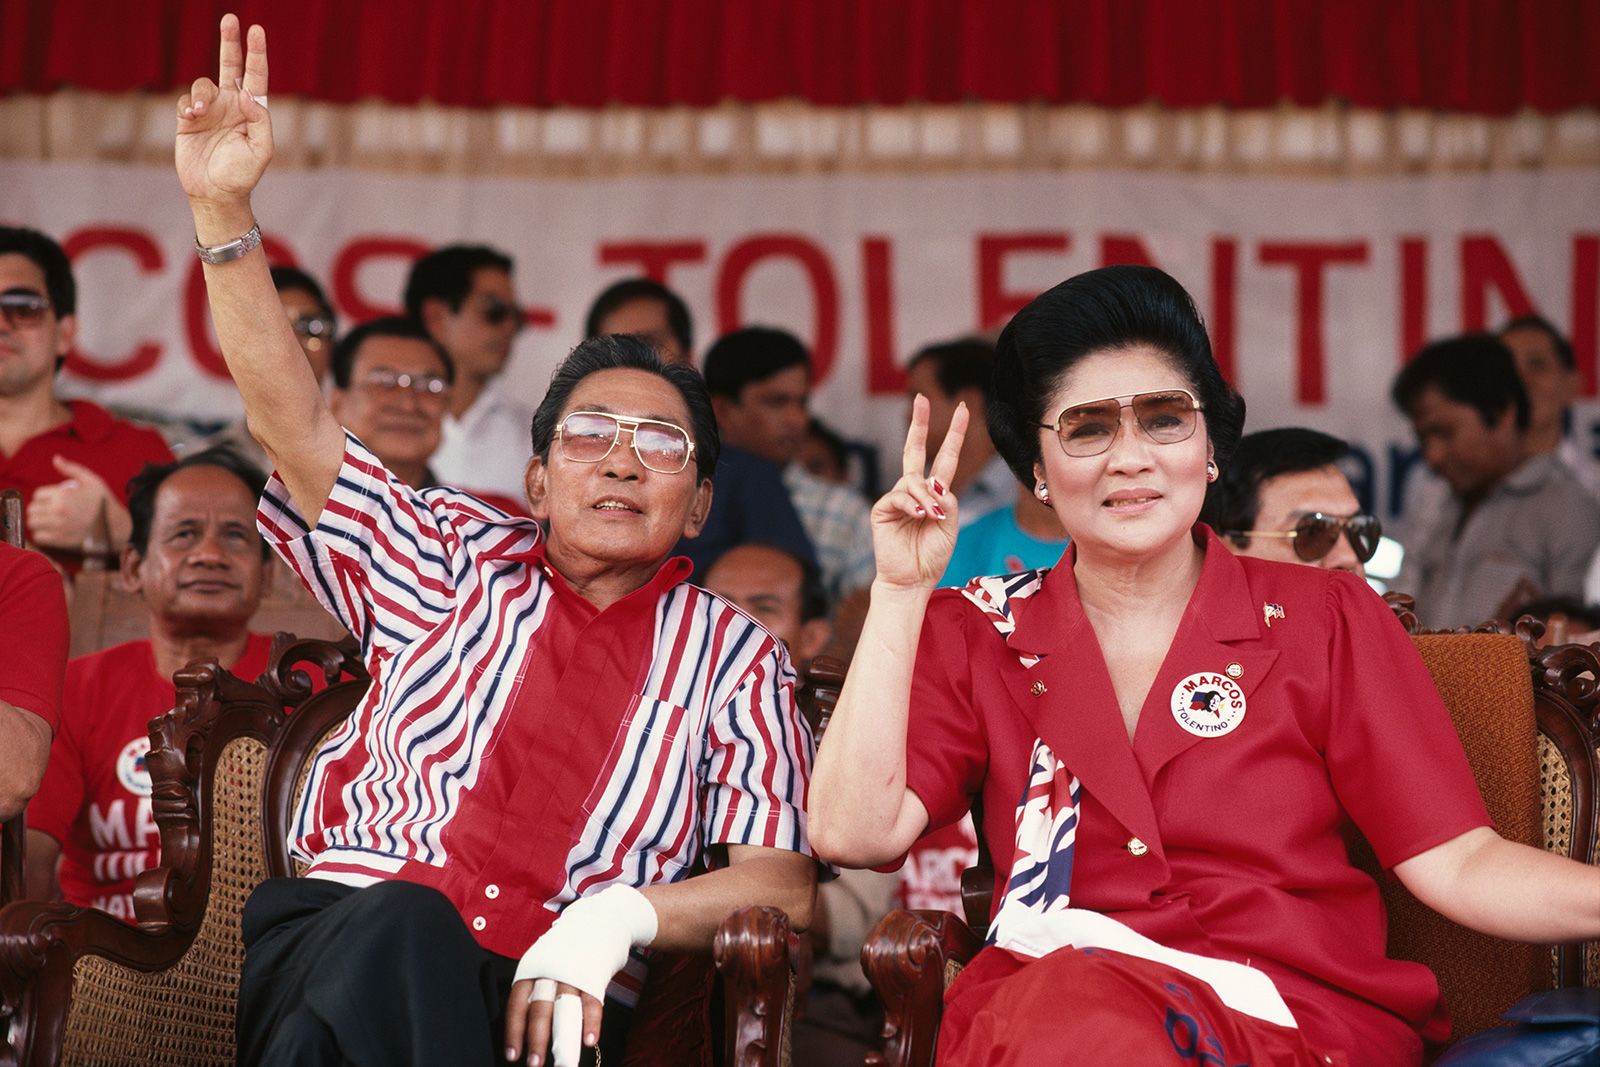 Filipino President Ferdinand Marcos and his wife Imelda pictured during a campaign event in Mindoro in 1986.